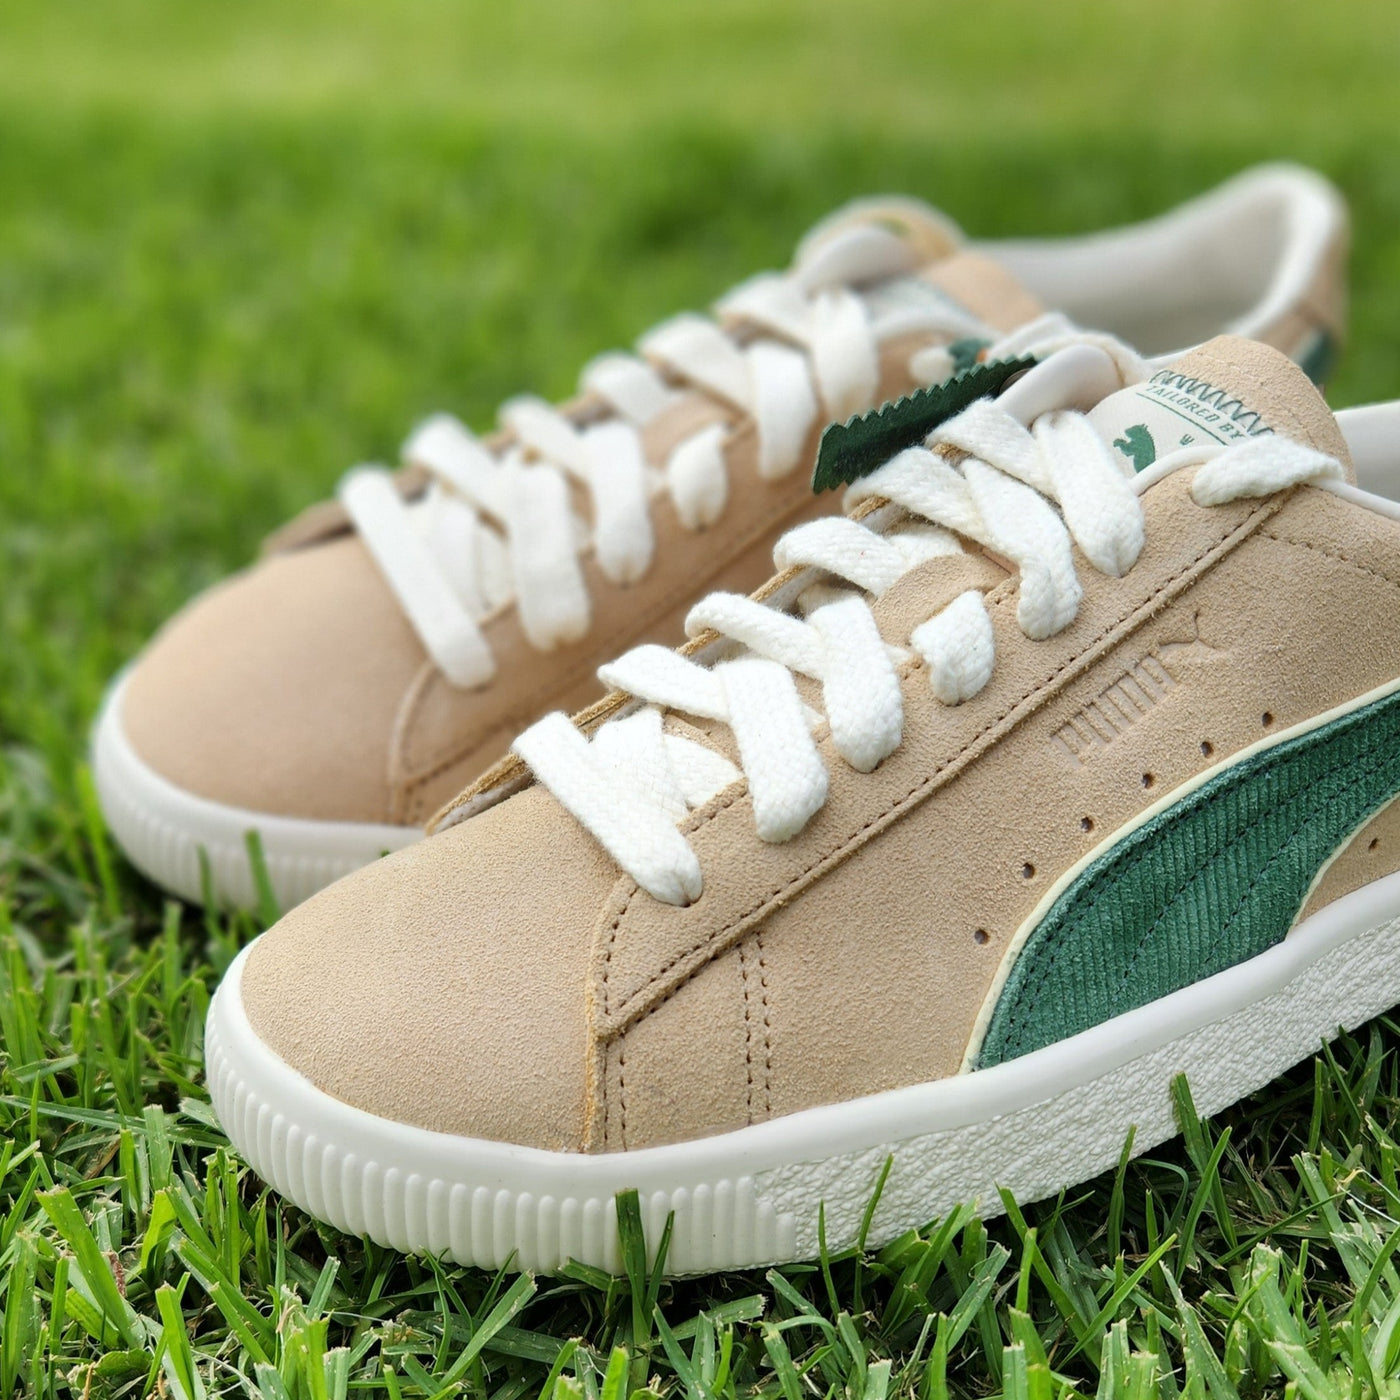 PUMA PLAYERS' LOUNGE COLLECTION IS A LOVE LETTER TO VINTAGE